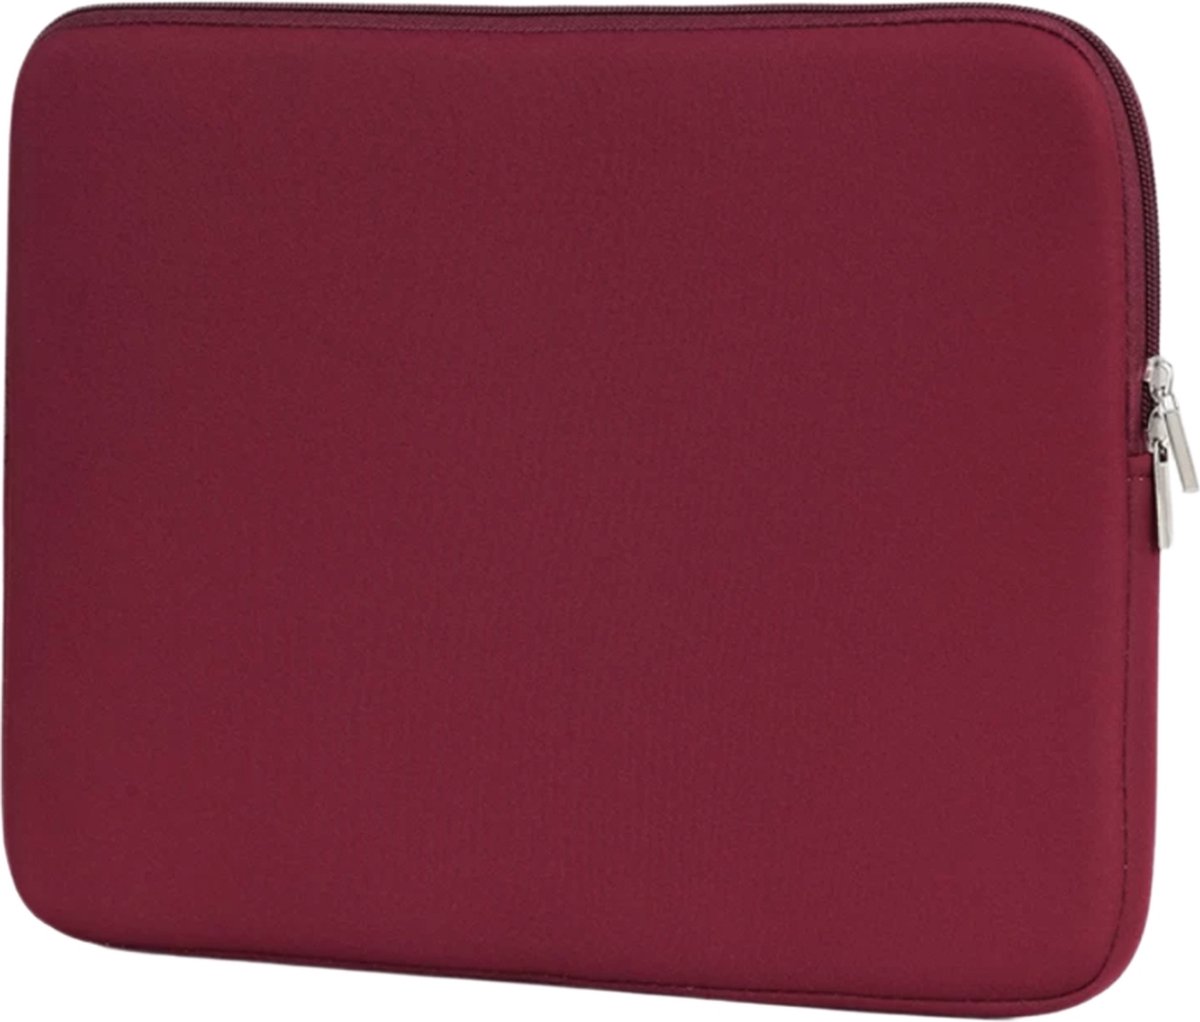 SoftTouch – laptophoes – 14,6 inch – ritssluiting – bordeaux rood - Notebook Tas - Soft Touch - spatwaterbestending